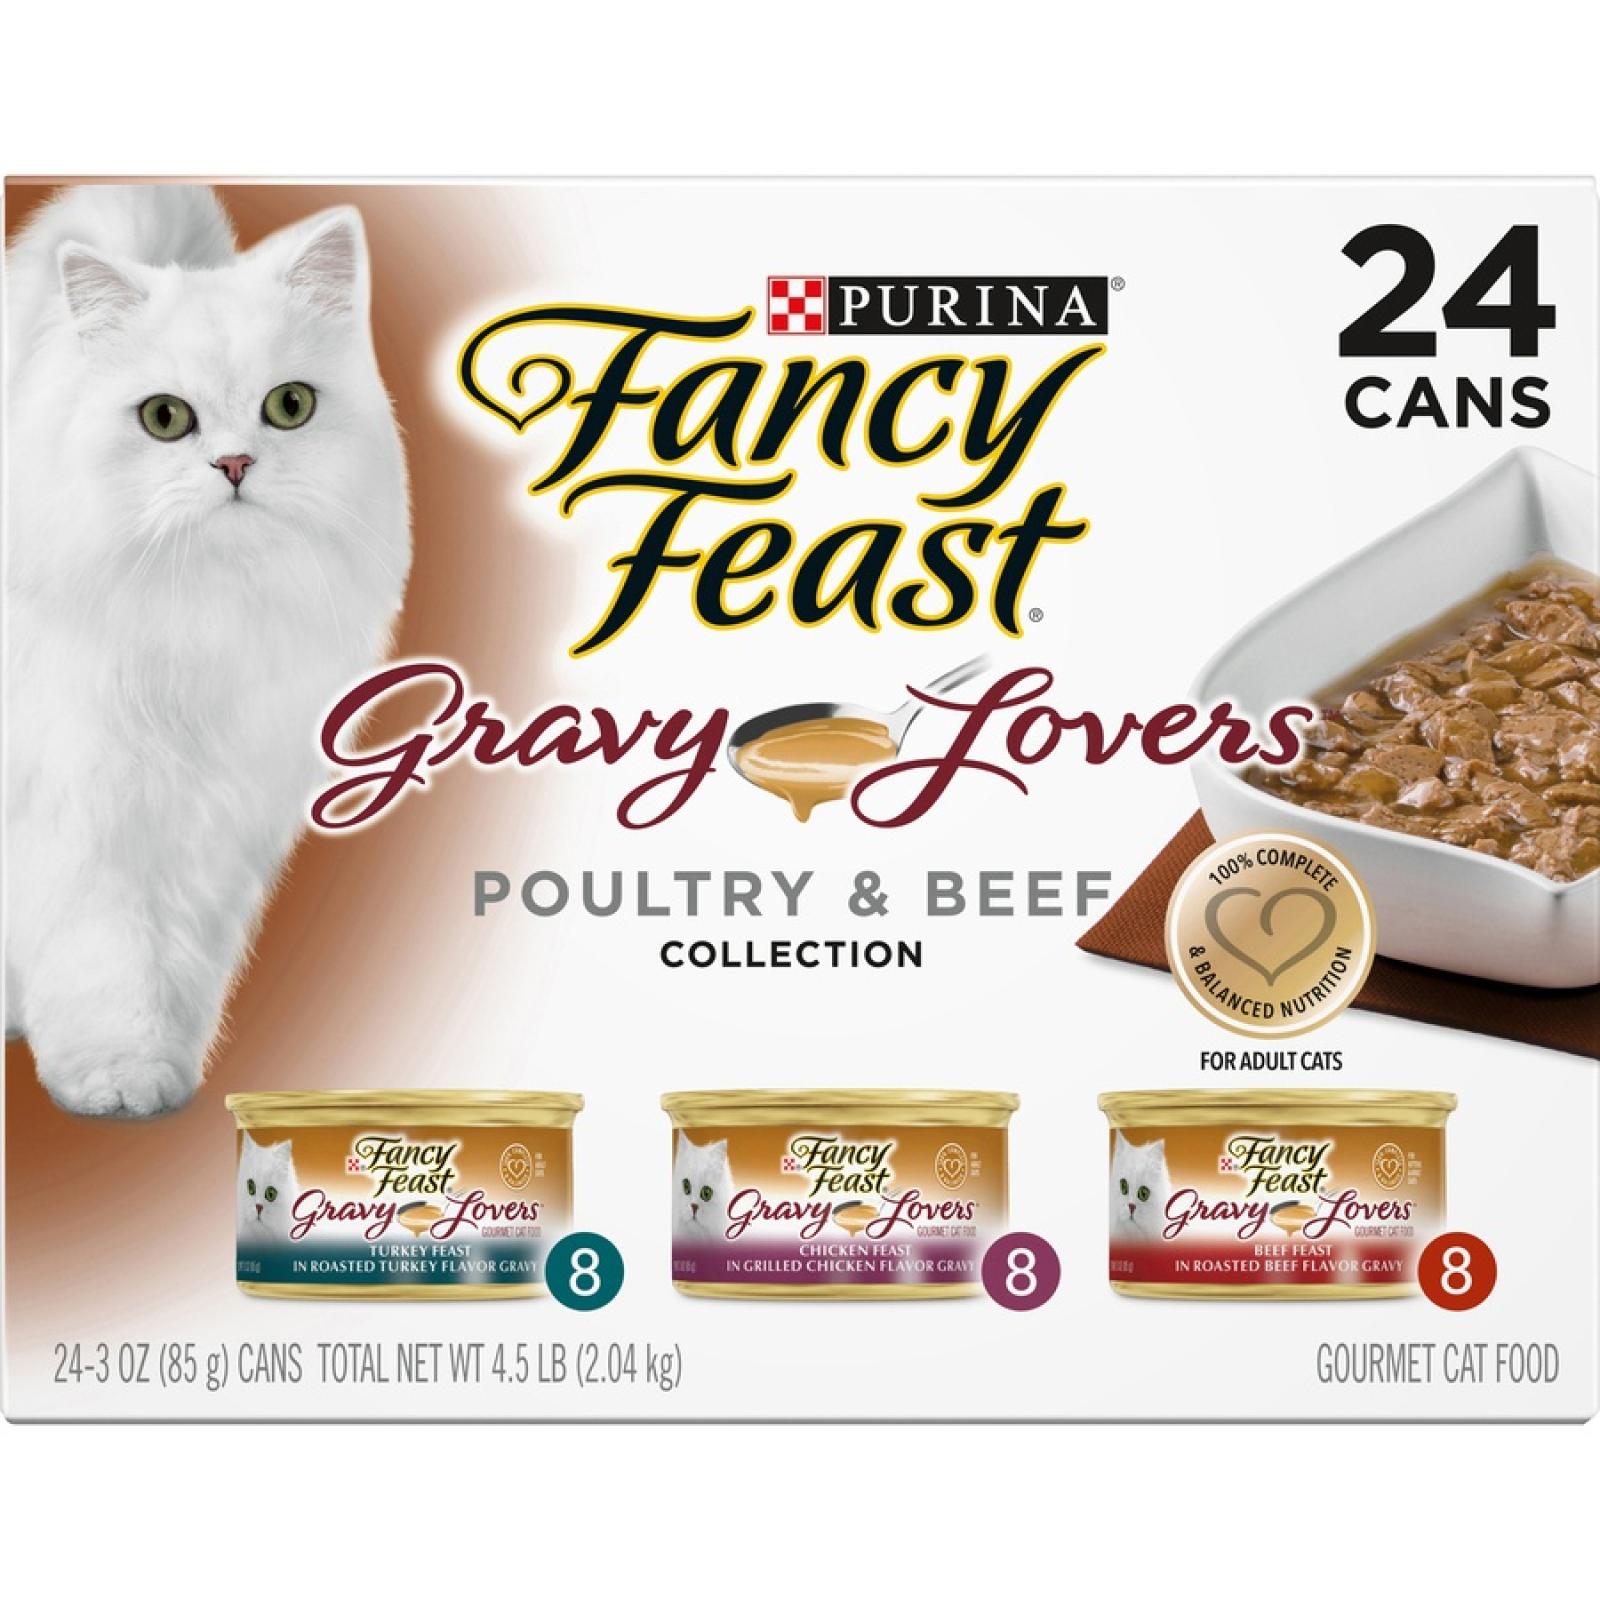 Purina Fancy Feast Gravy Lovers Poultry & Beef Collection